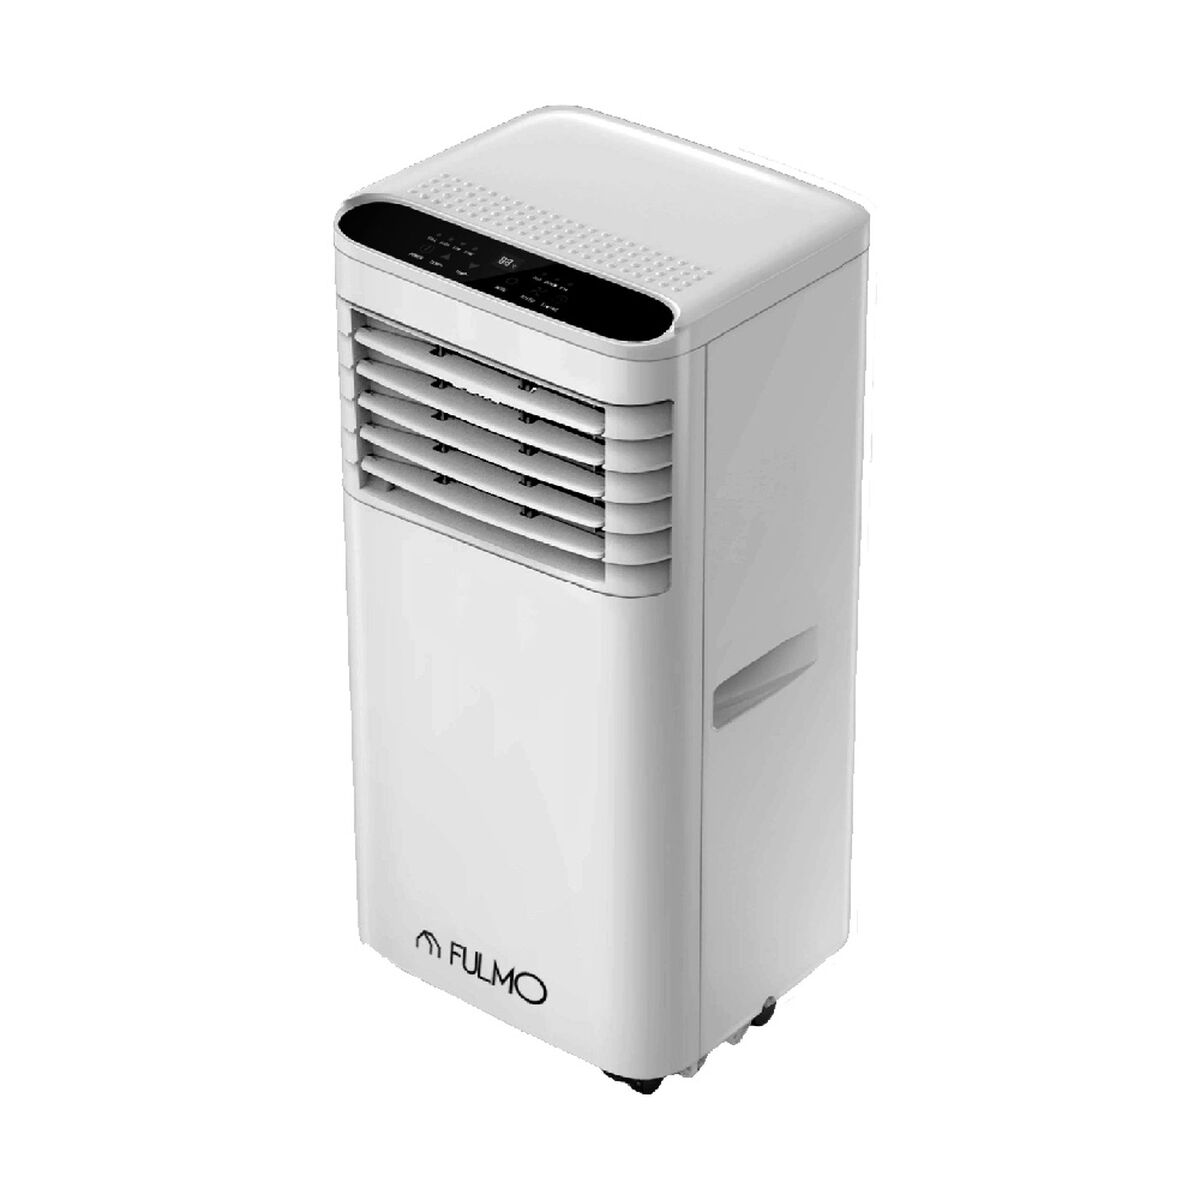 Draagbare Airconditioning Fulmo ECO R290 Wit A 1000 W